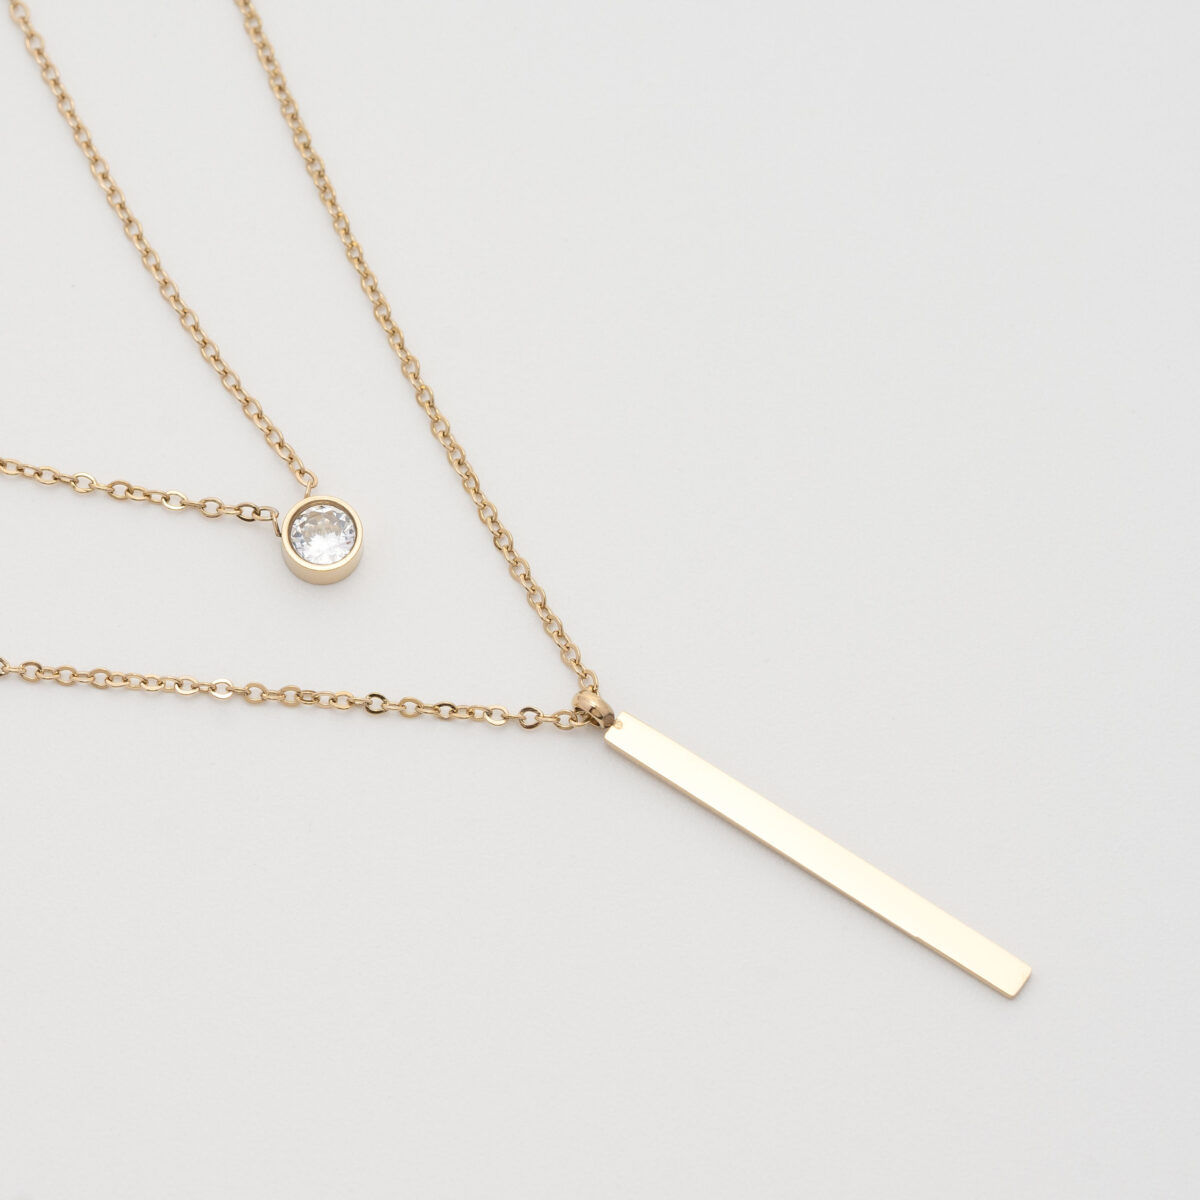 https://m.clubbella.co/product/solitaire-bar-necklace-2/ SOLITAIRE BAR NECKLACE (3)